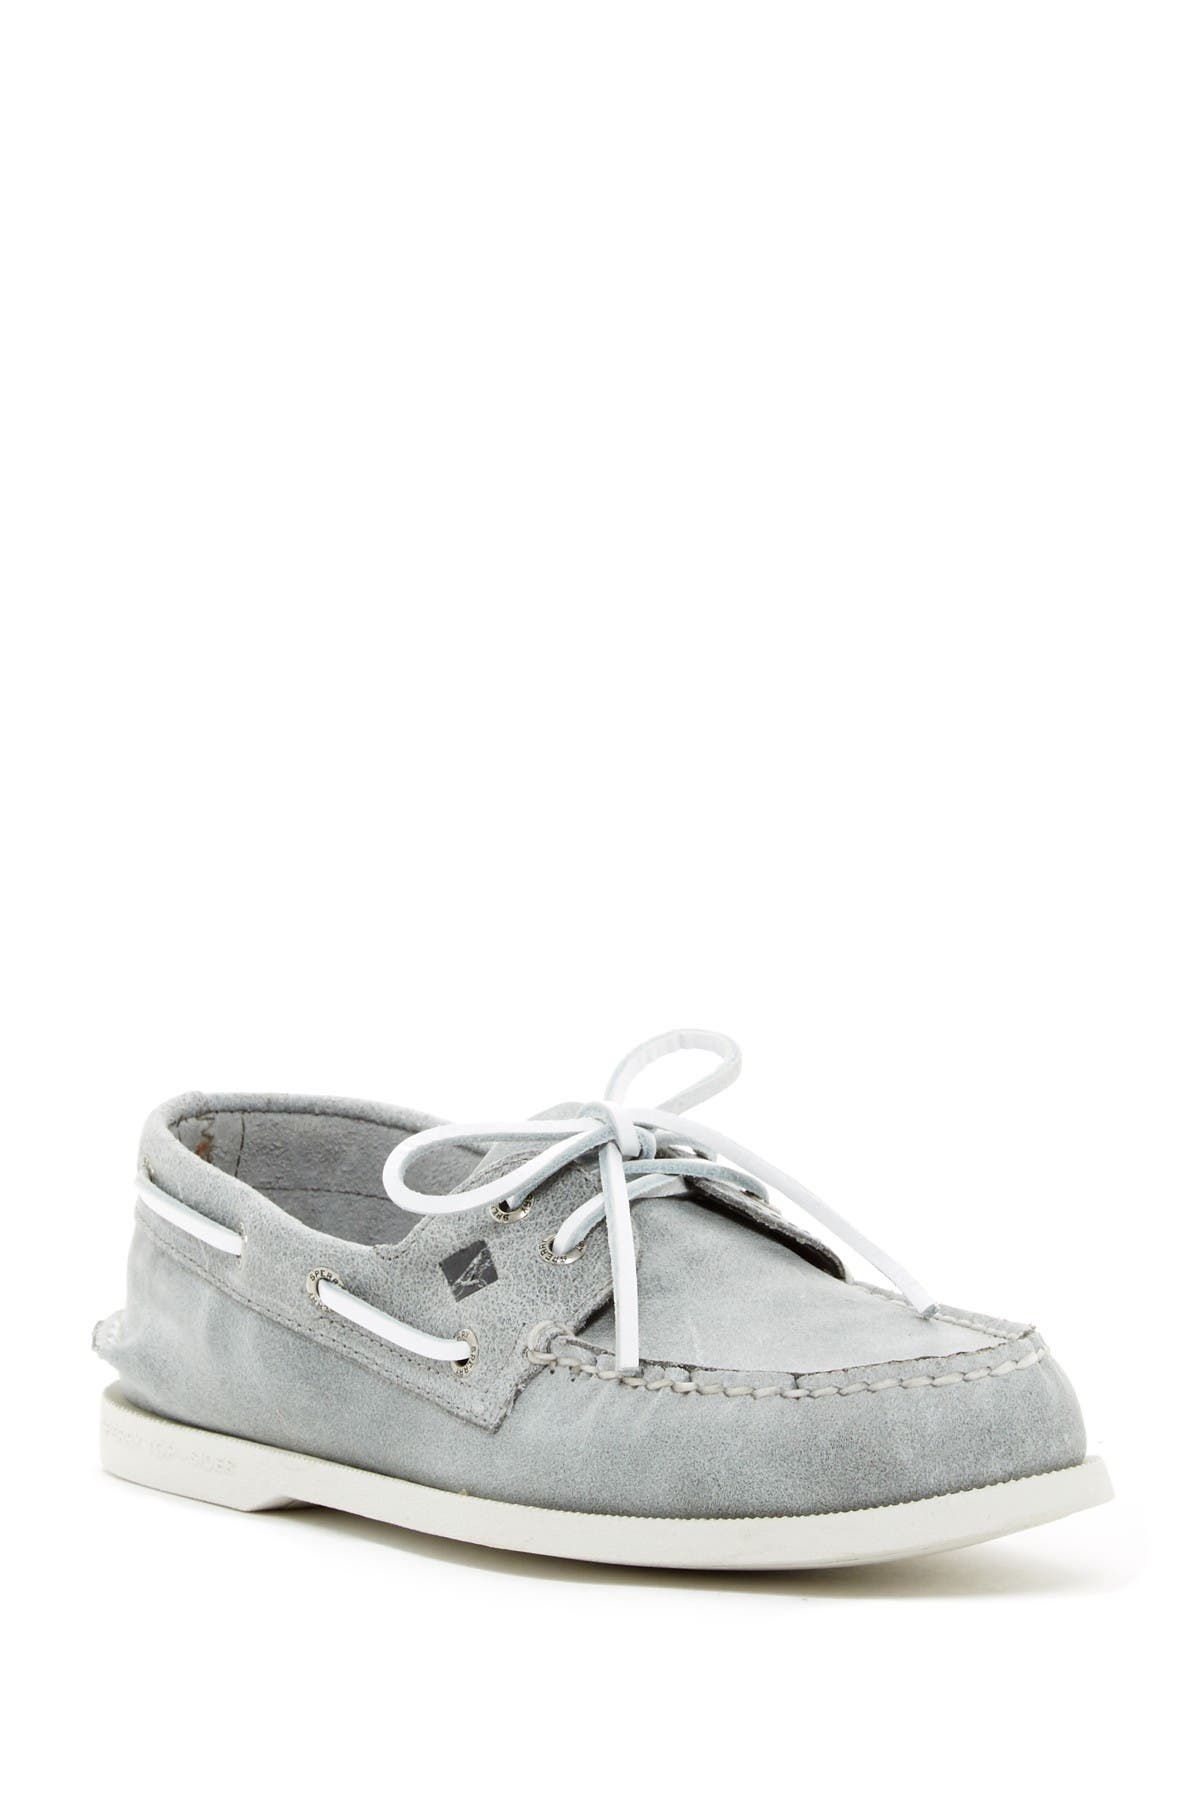 Sperry | Authentic Original 2-Eye Boat 